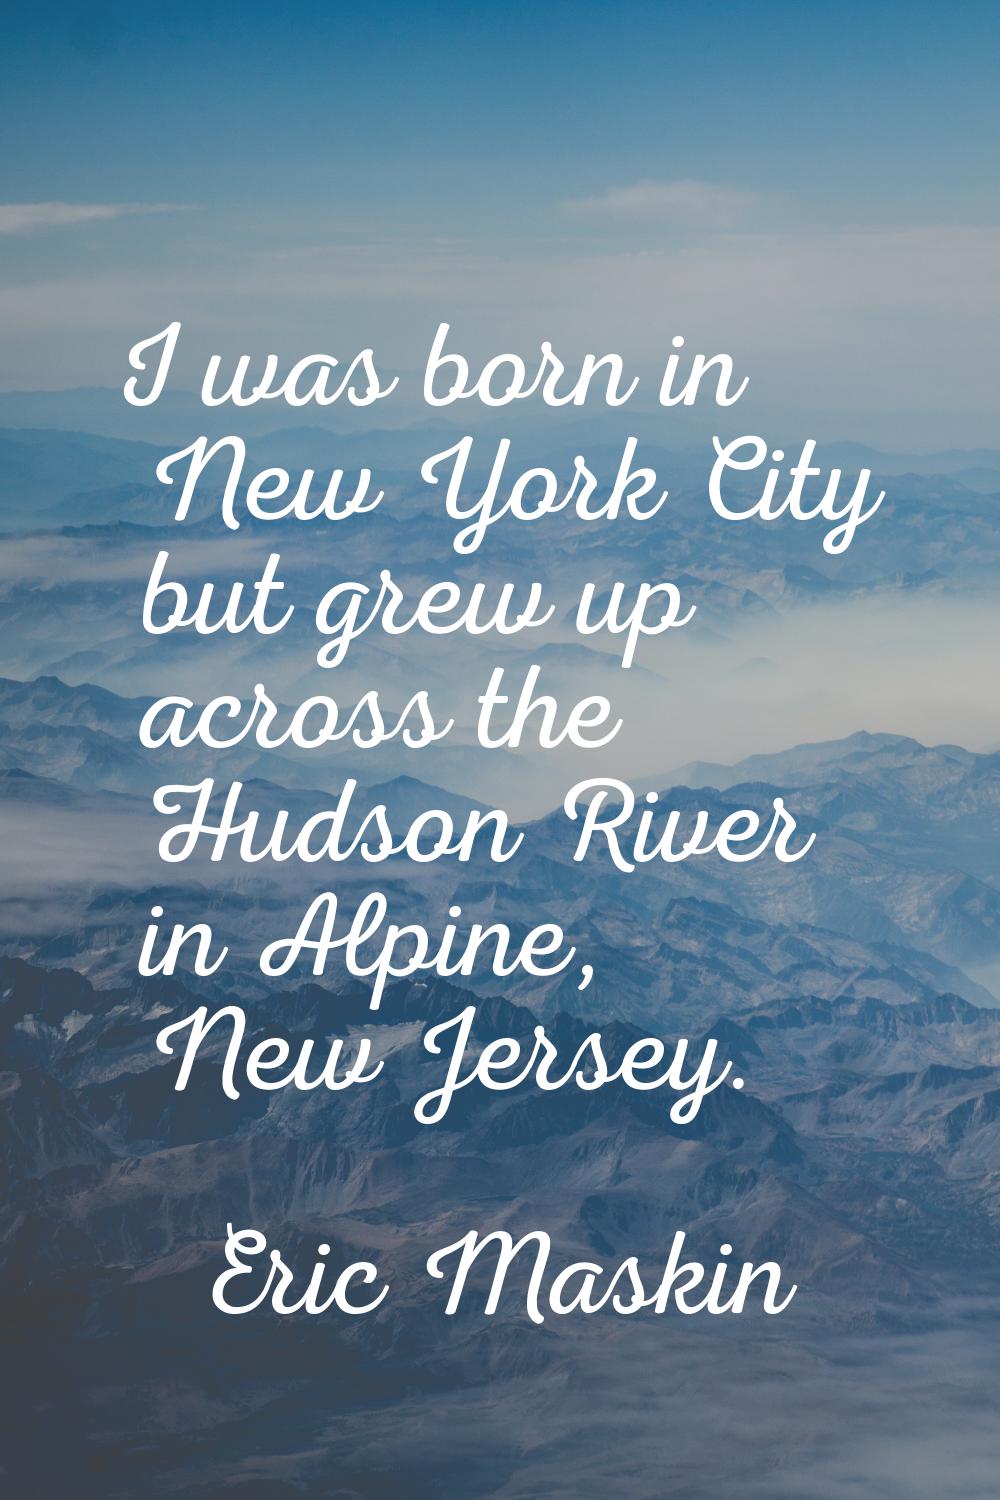 I was born in New York City but grew up across the Hudson River in Alpine, New Jersey.